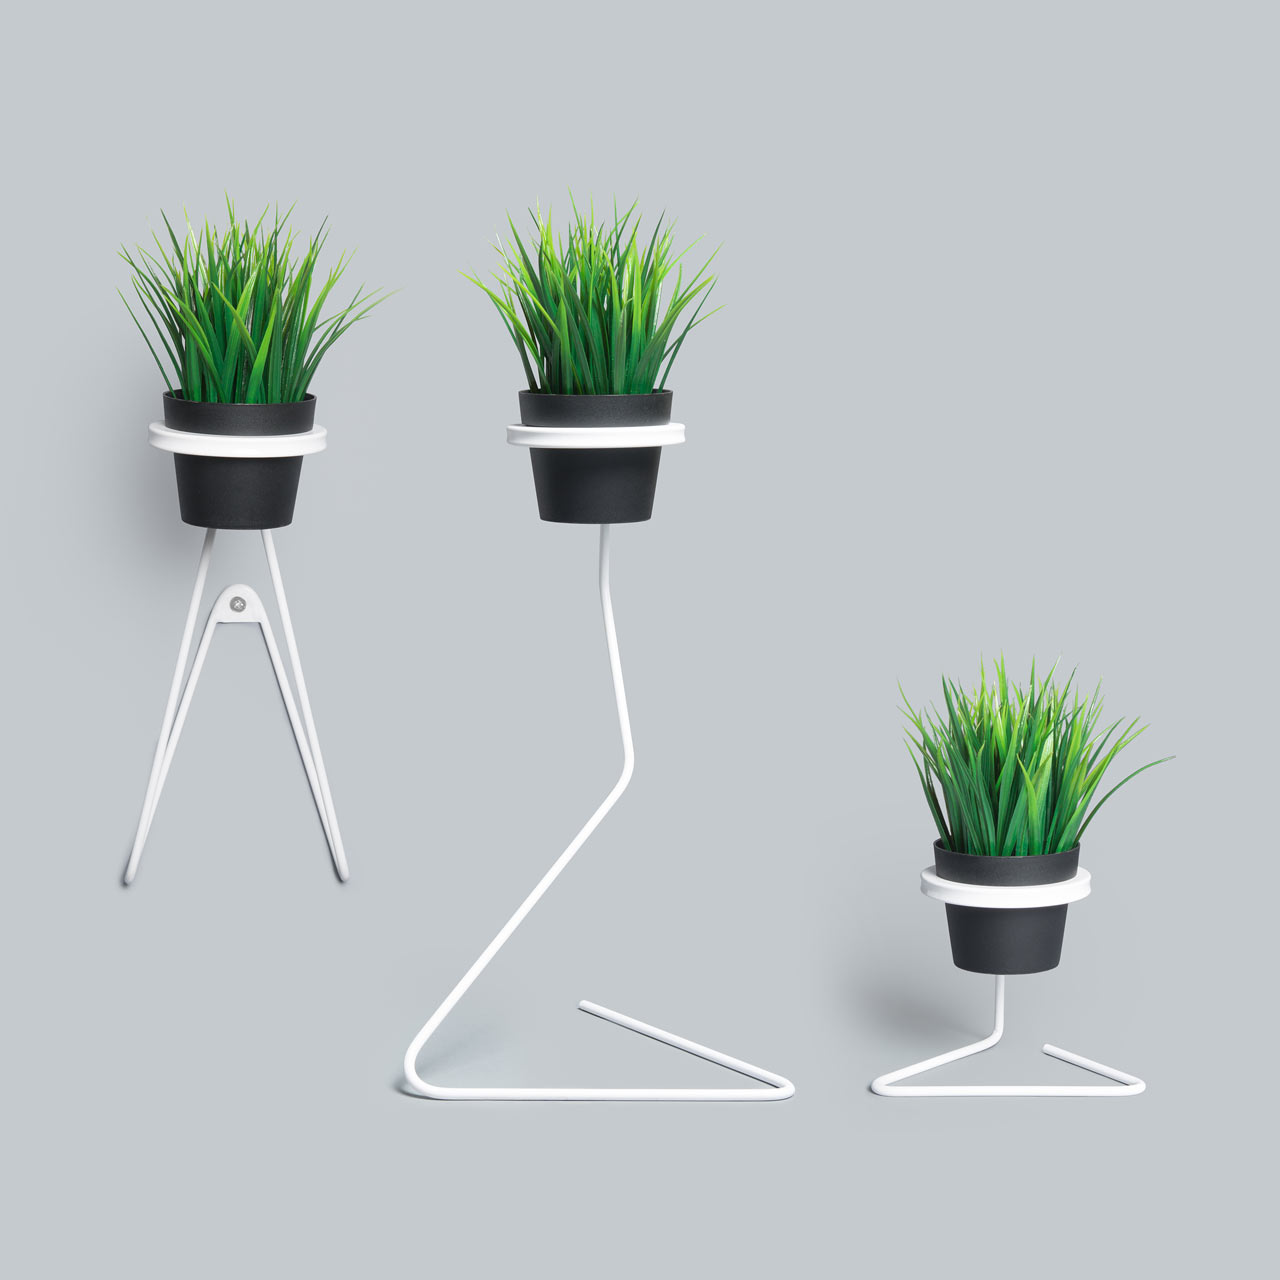 Collection Nº 1: A Series of Suspended Planters